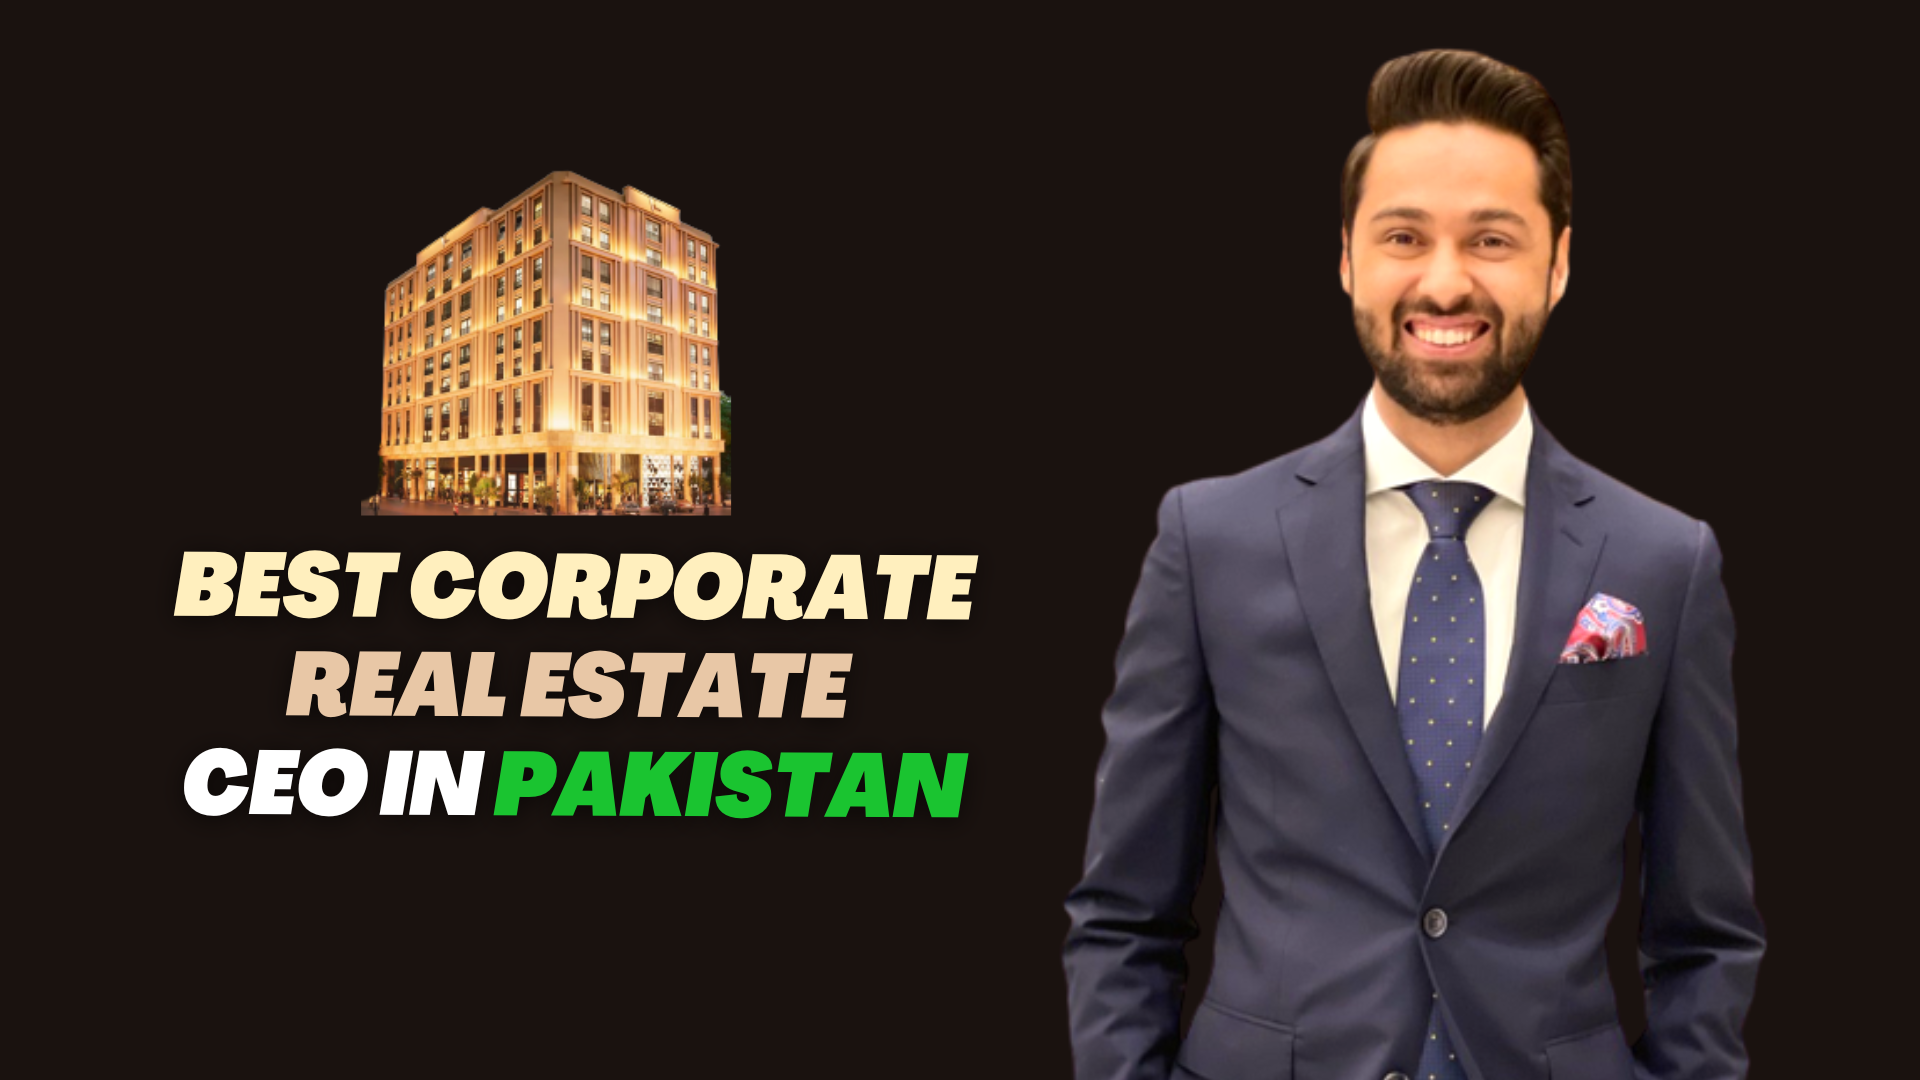 Youngest Corporate Real Estate CEO of Pakistan is Muteeb Siddiqi